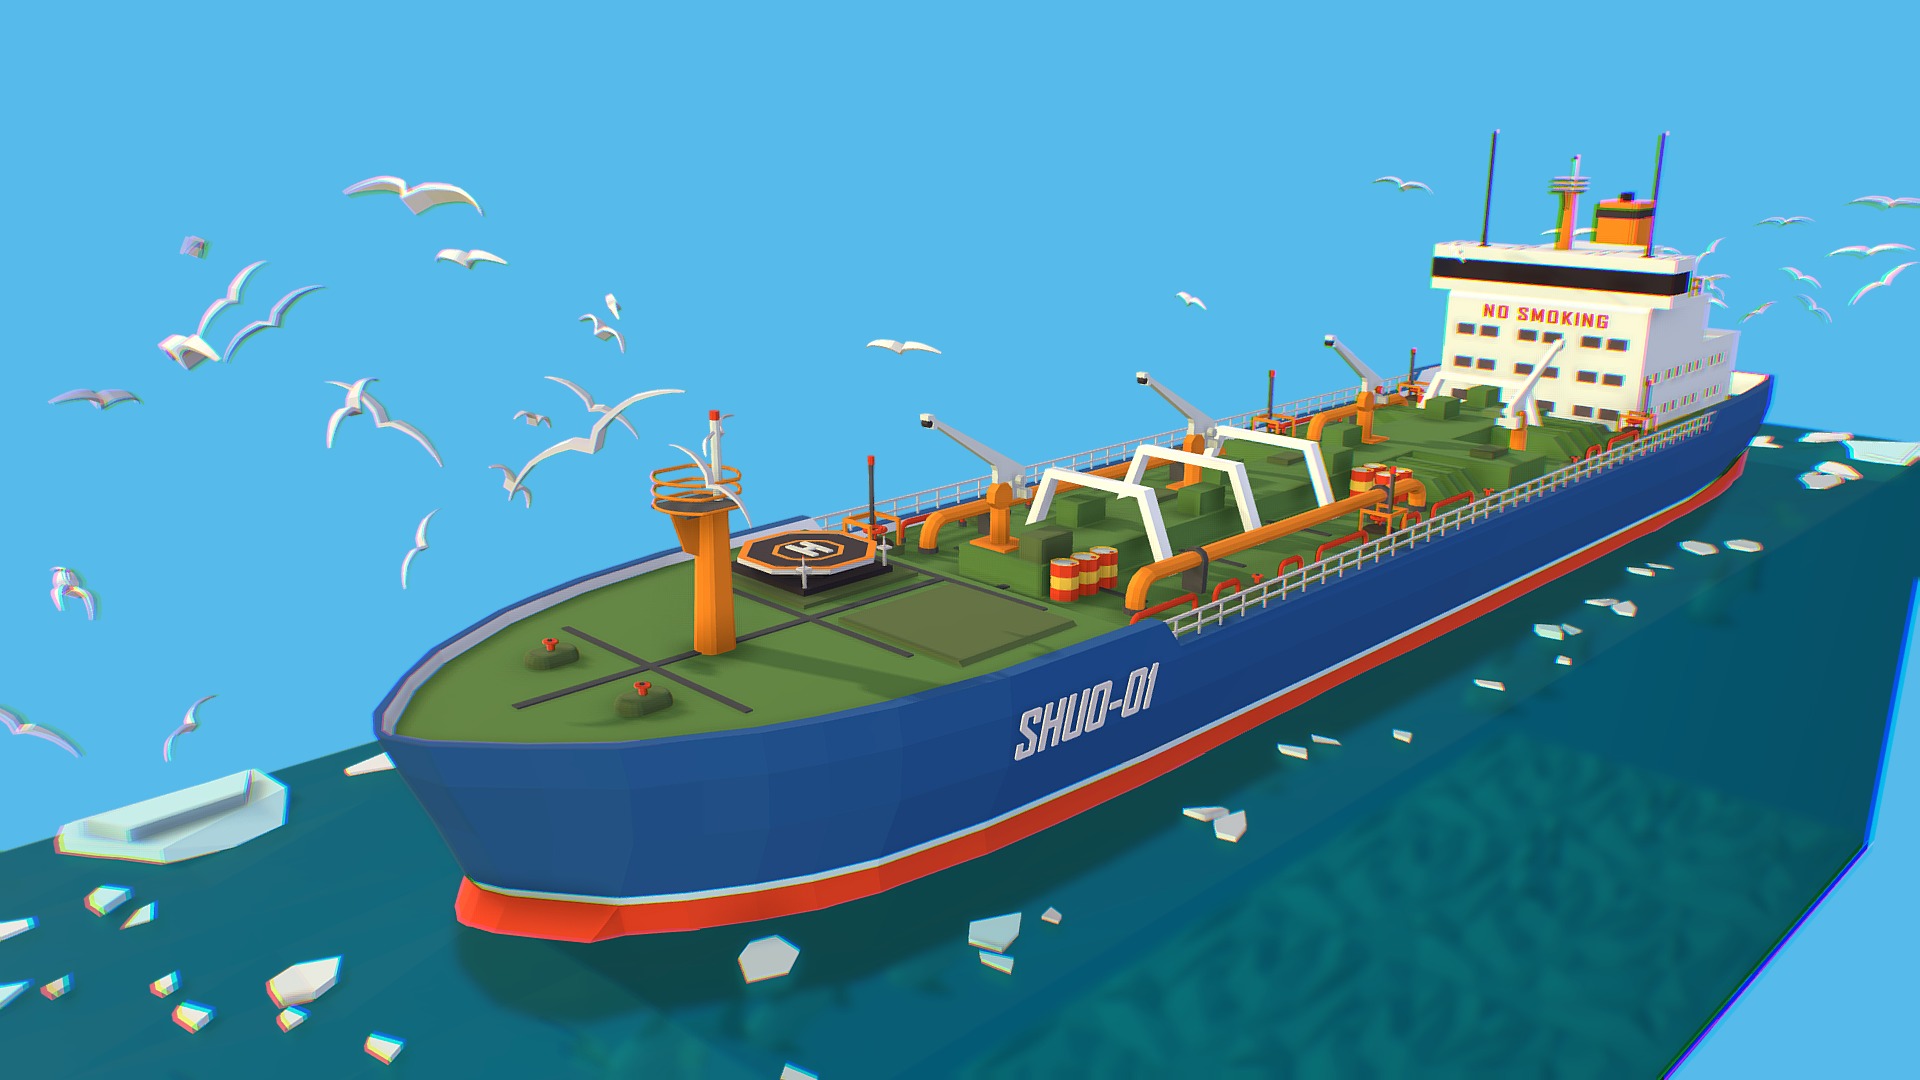 3D model Isometric Boat Ship Blue Oil Tanker in ocean - This is a 3D model of the Isometric Boat Ship Blue Oil Tanker in ocean. The 3D model is about a ship with many birds flying around it.